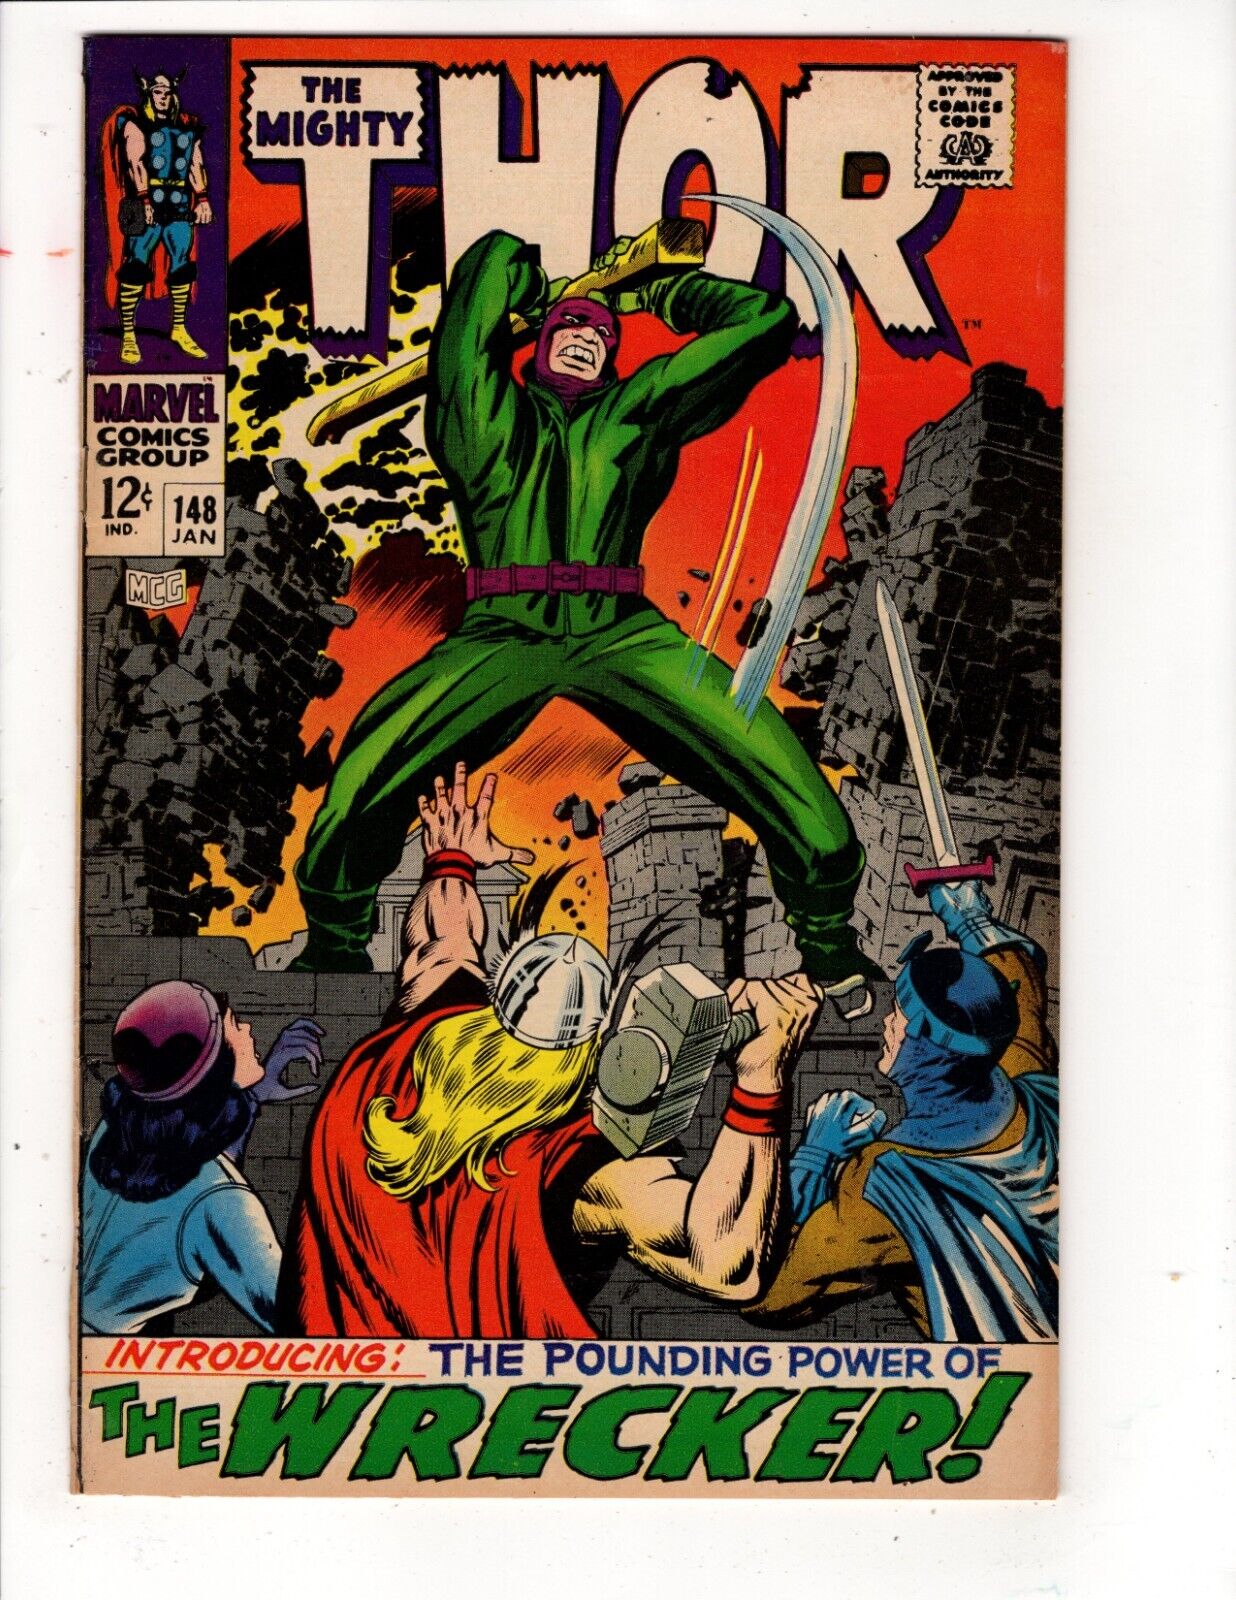 The Mighty Thor #148(KEY) 1968(THIS BOOK HAS MINOR RESTORATION SEE DESCRIPTION)